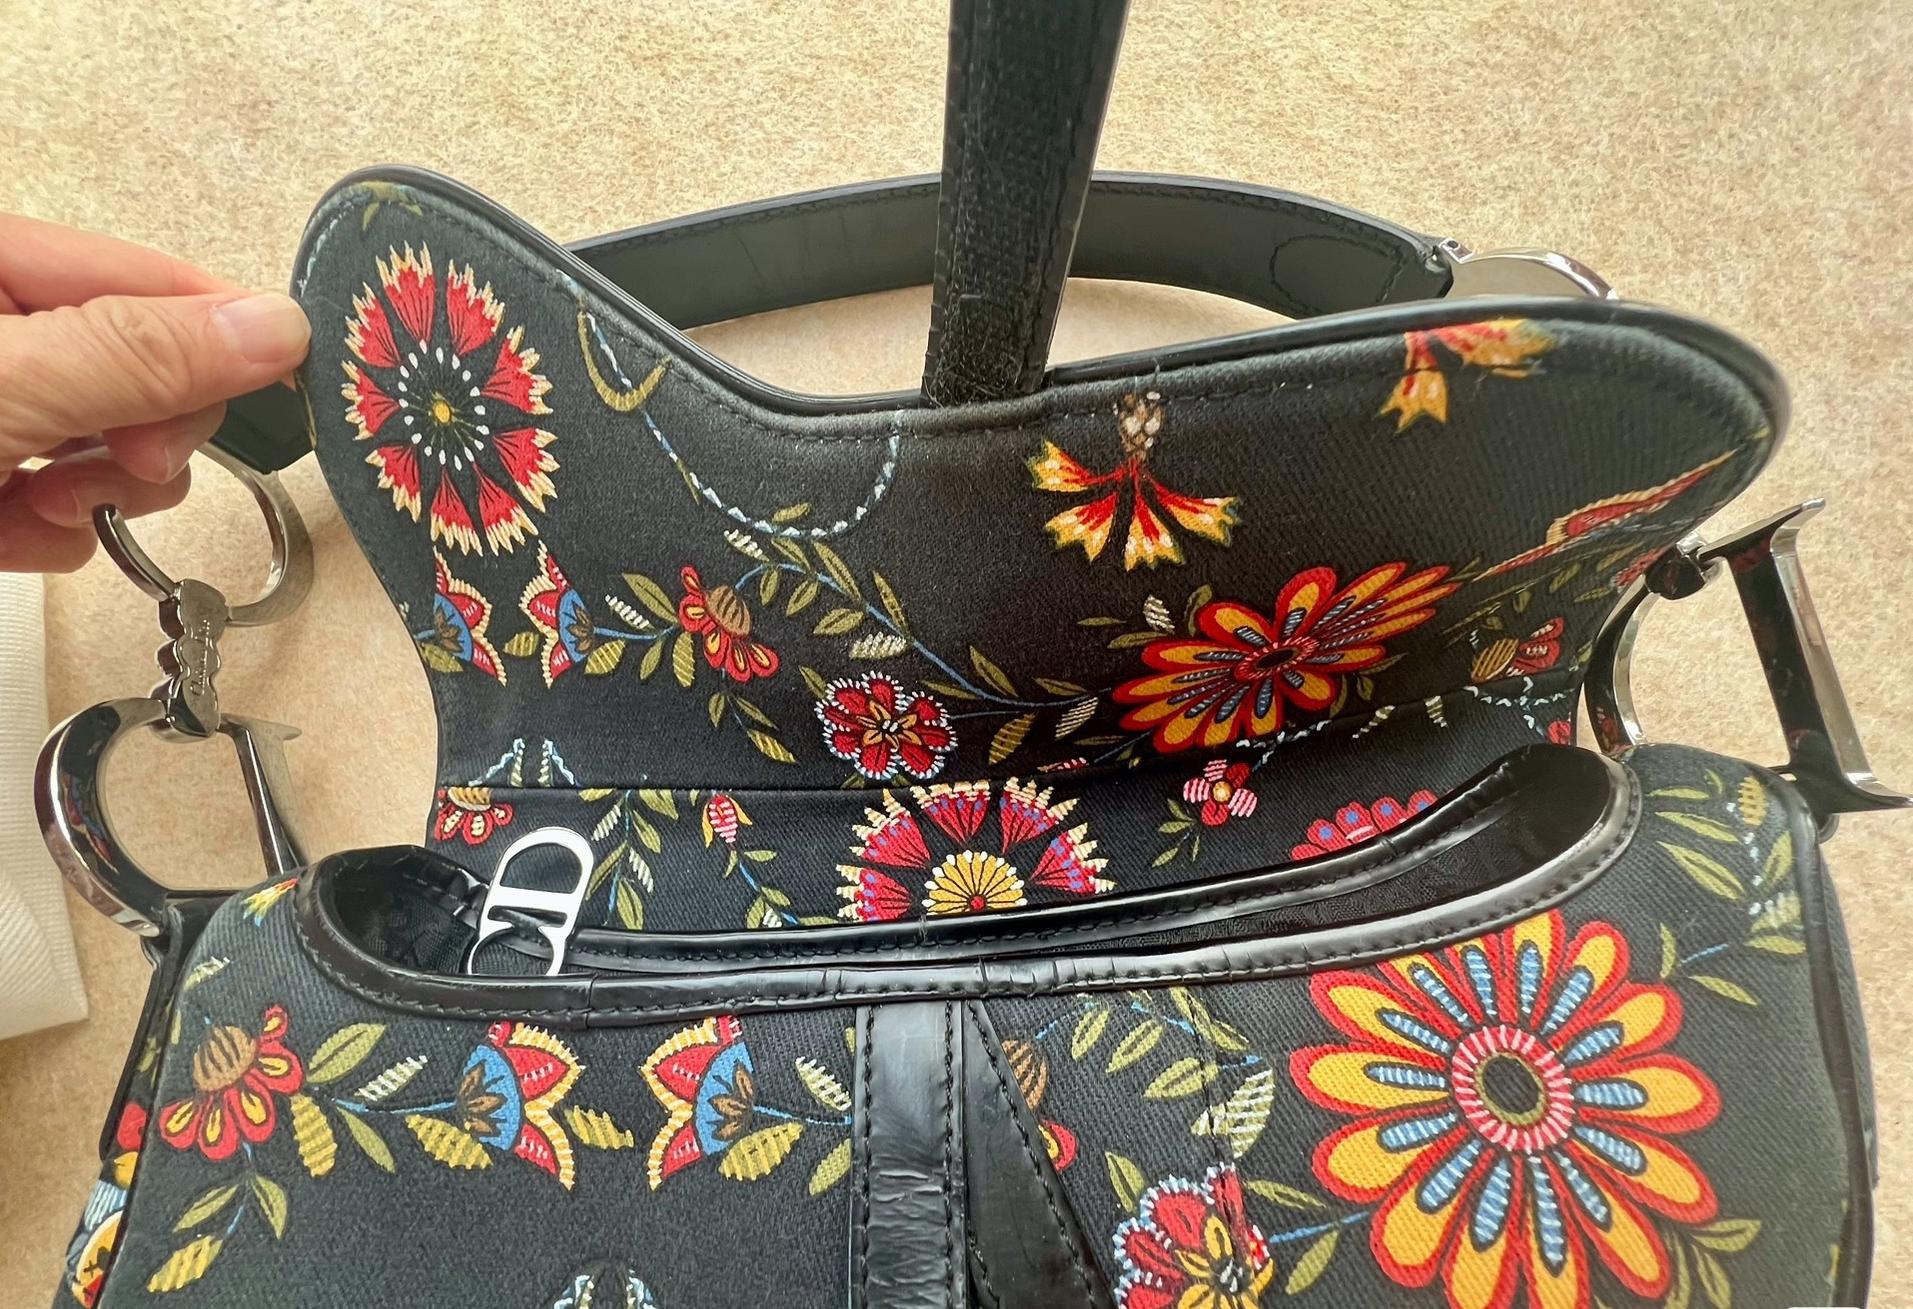 Dior Saddle Black Denim with Floral Embroidery John Galliano Design For Sale 10